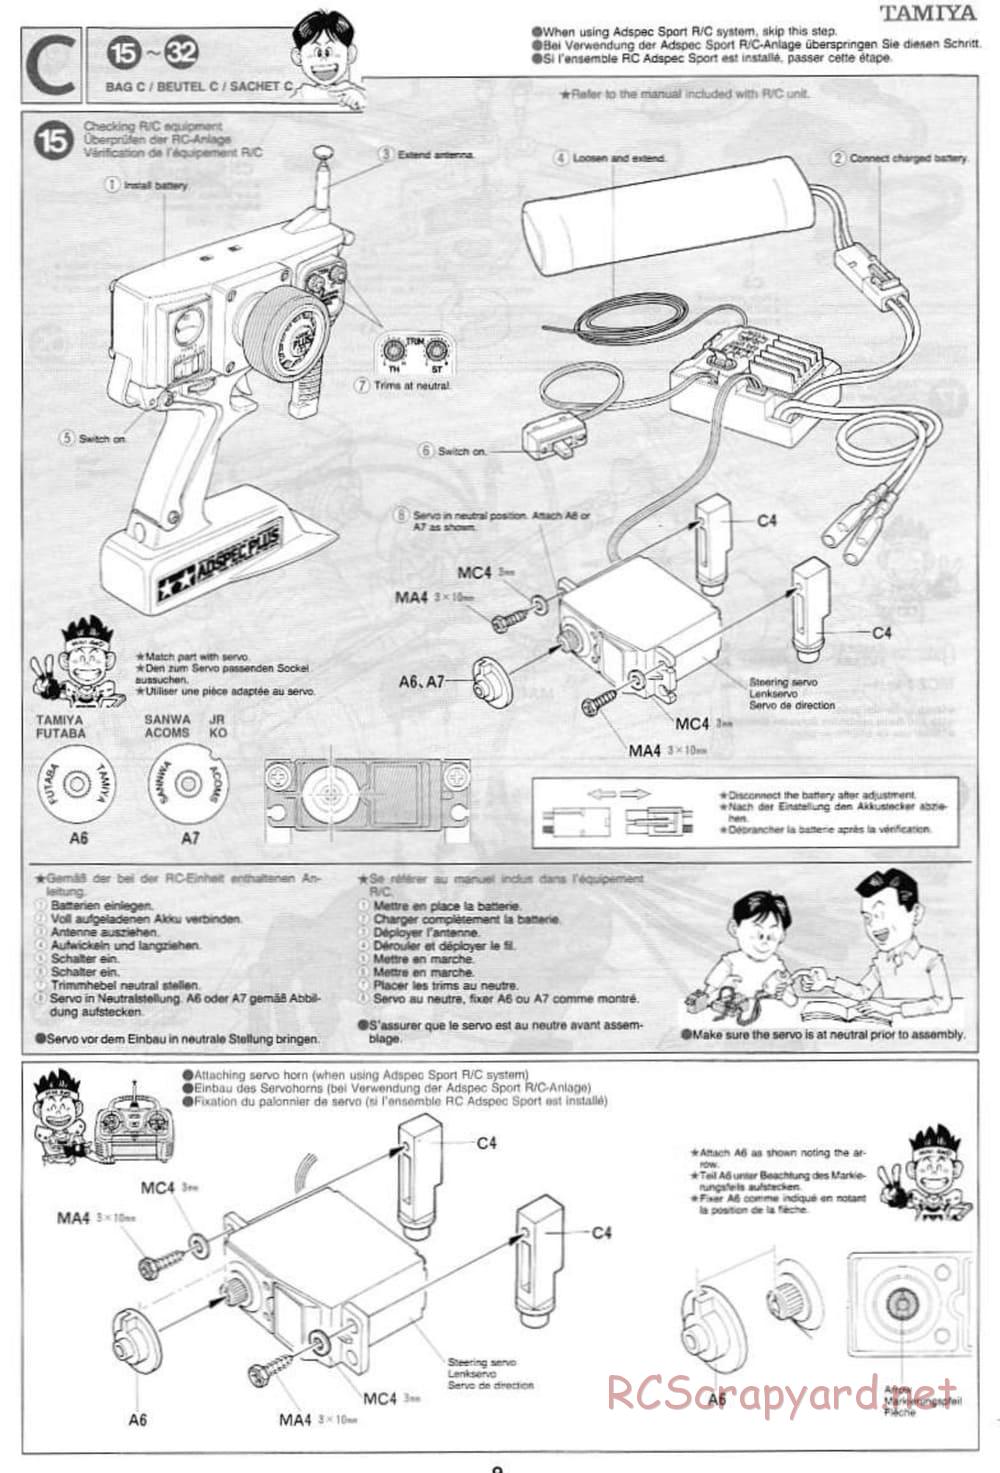 Tamiya - Wild Ceptor - Boy's 4WD Chassis - Manual - Page 9